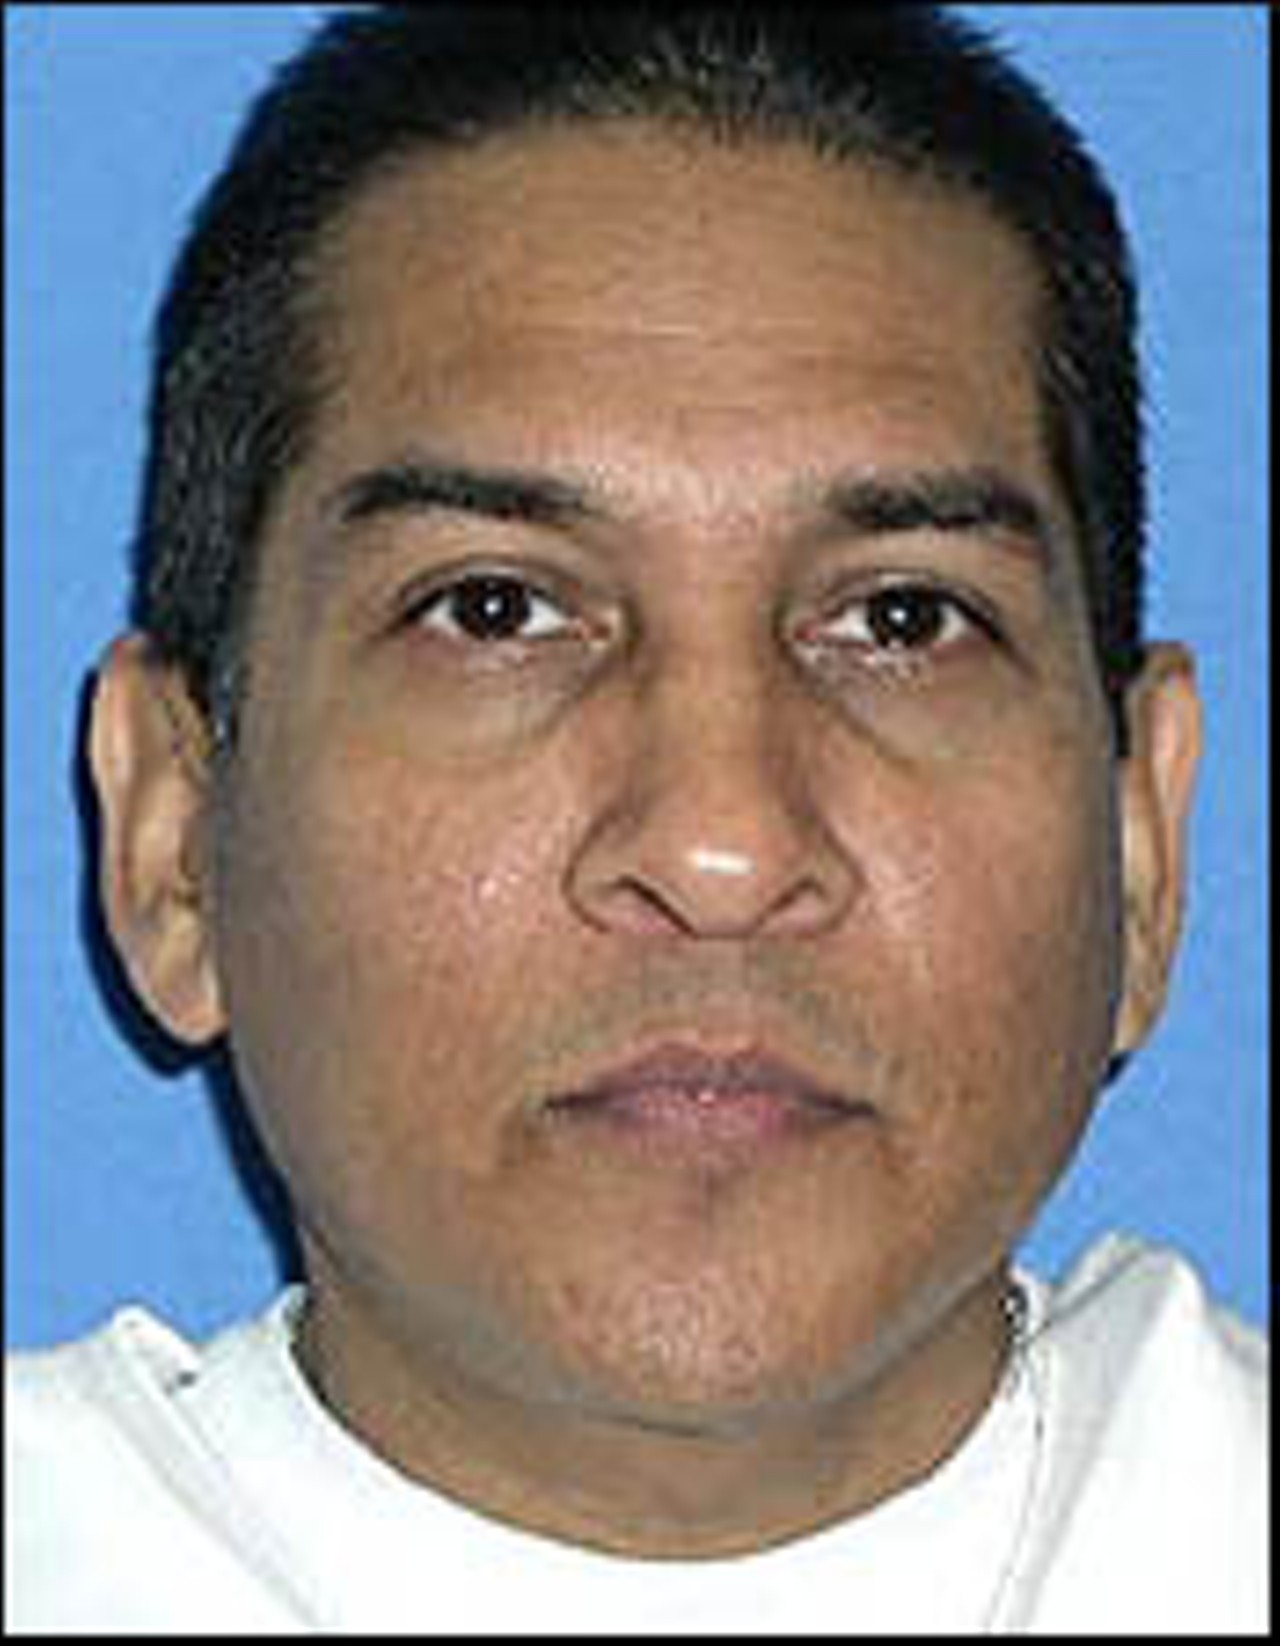 The Killings at the Hands of Robert "Beaver" Perez
A leader of the prison-based Mexican Mafia, Robert “Beaver” Perez was linked to more than 15 murders locally. Using his charisma and ruthlessness to gain control within the gang, Perez was finally nabbed for shooting two fellow gang members after the mafia split in two, though he reportedly ordered a number of other brutal deaths. Though he never served a sentence for it, Perez was also convicted for his ordering a hit on a home on West French Place, which resulted in five deaths.
Photo via Texas Department of Justice